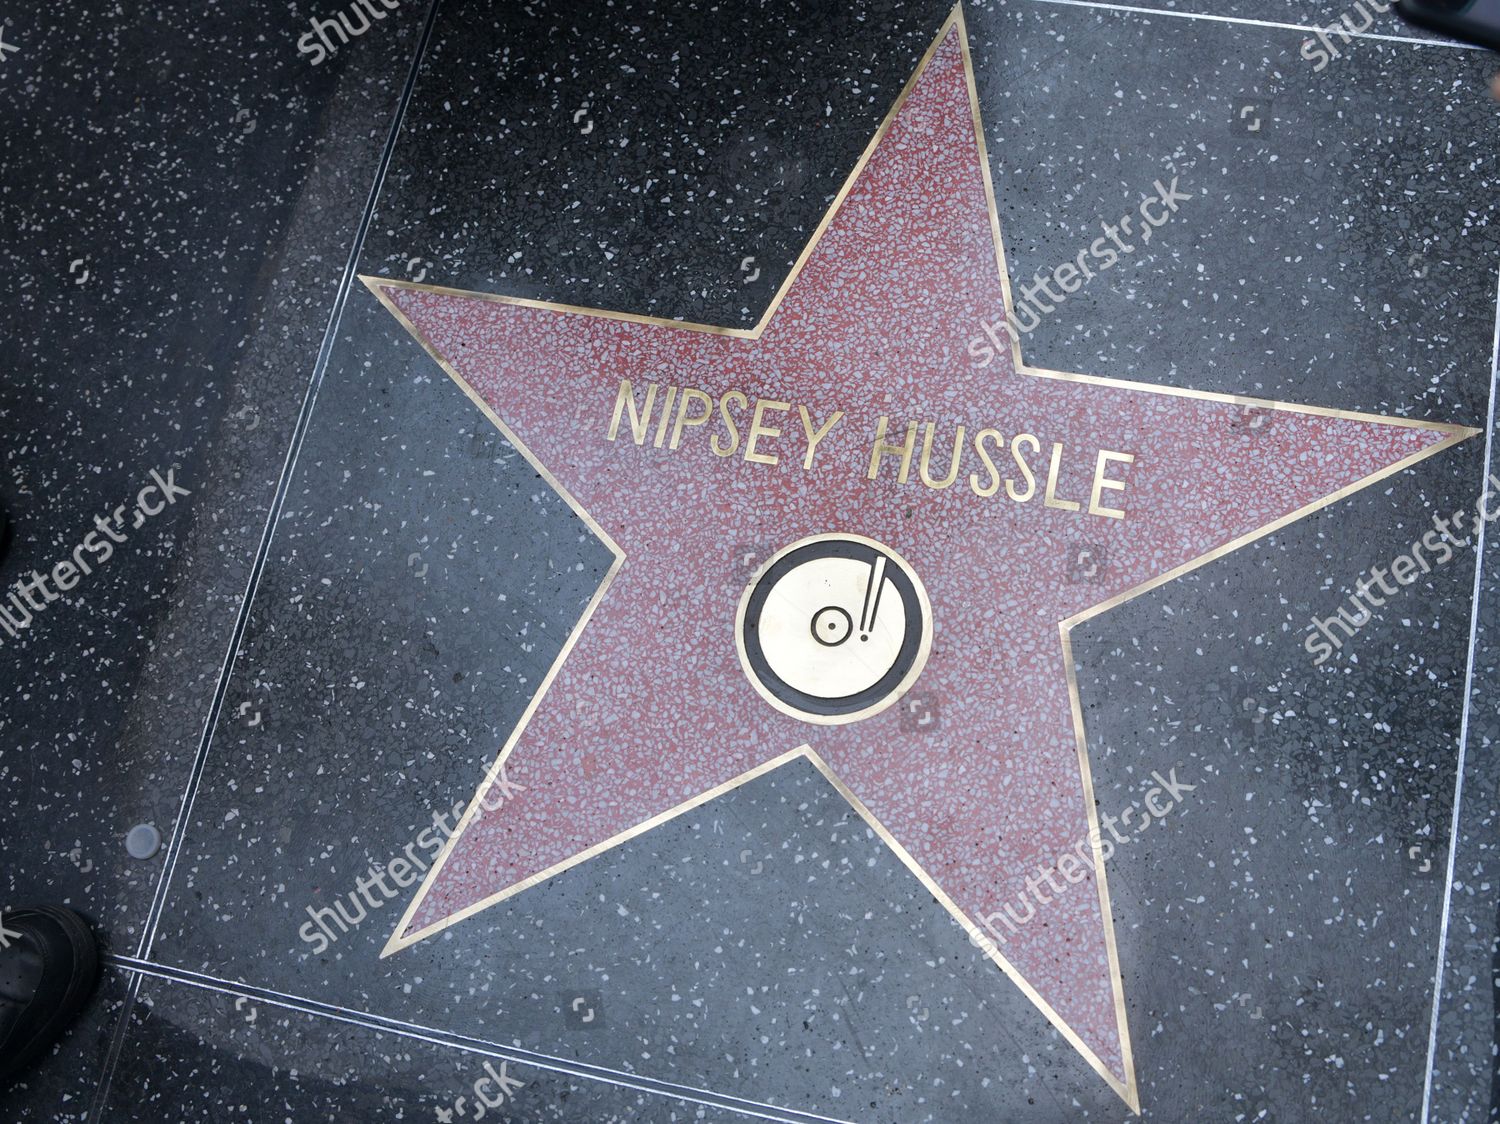 Nipsey Hussle to receive Hollywood Walk of Fame Star